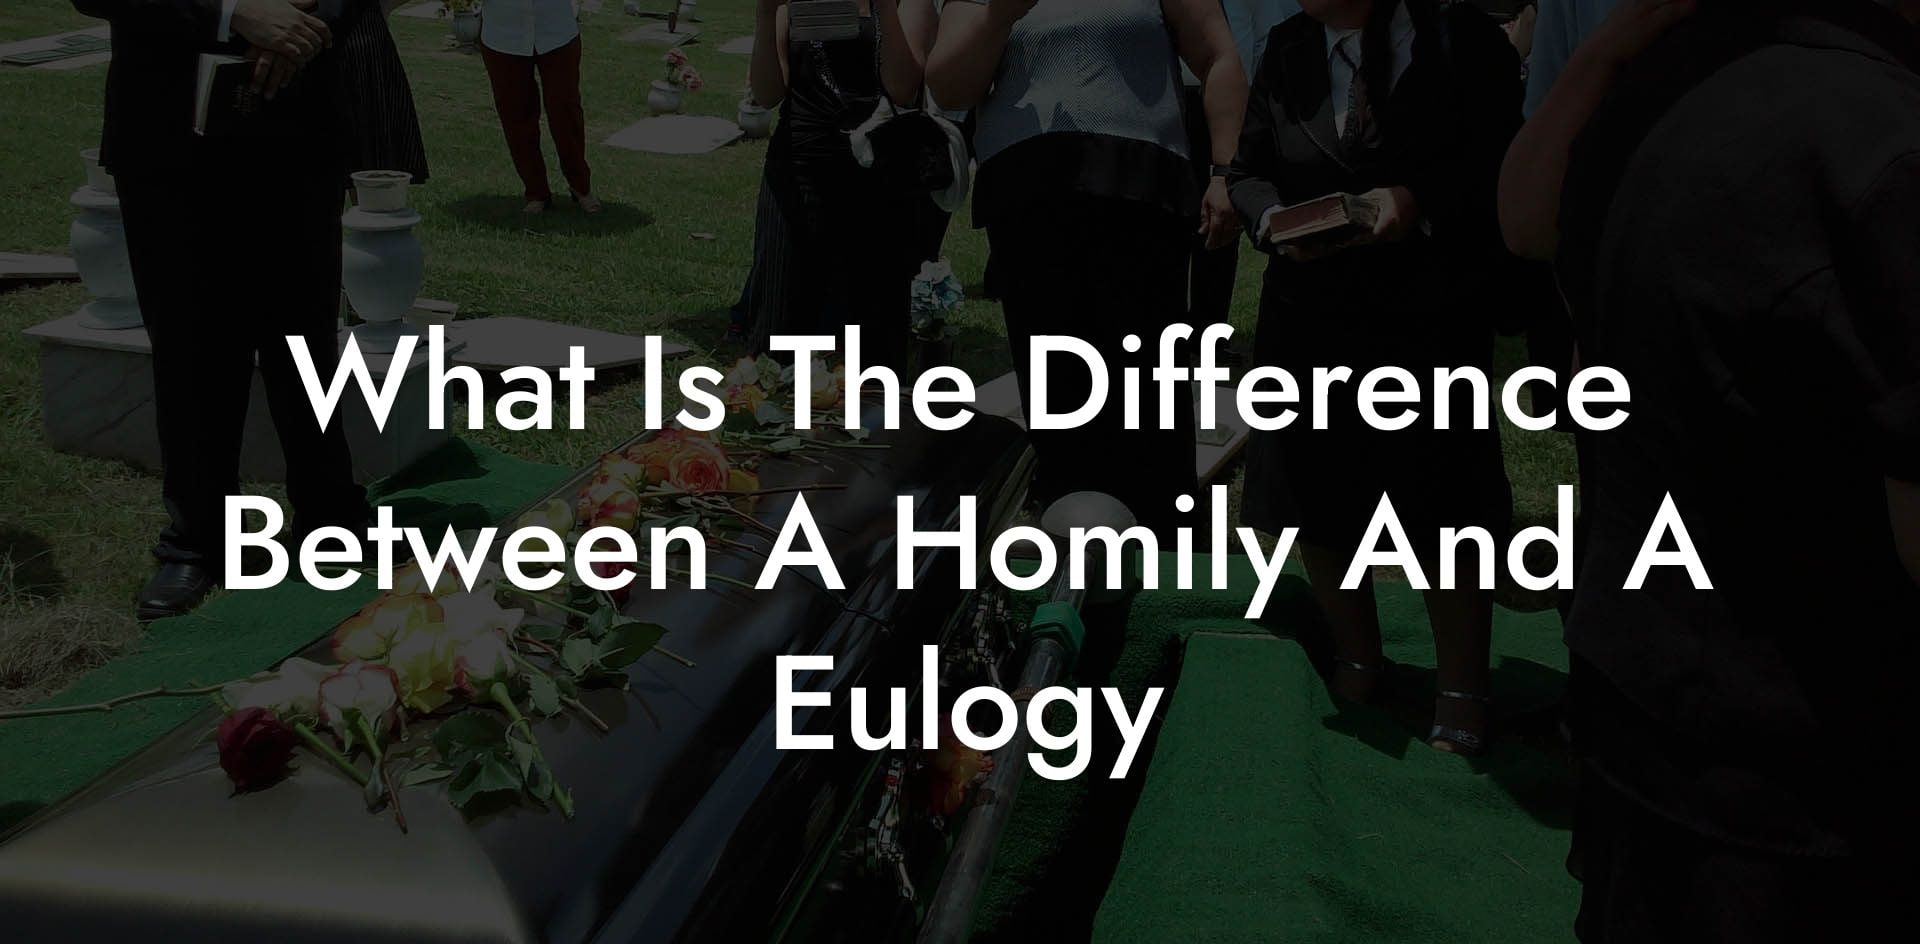 What Is The Difference Between A Homily And A Eulogy